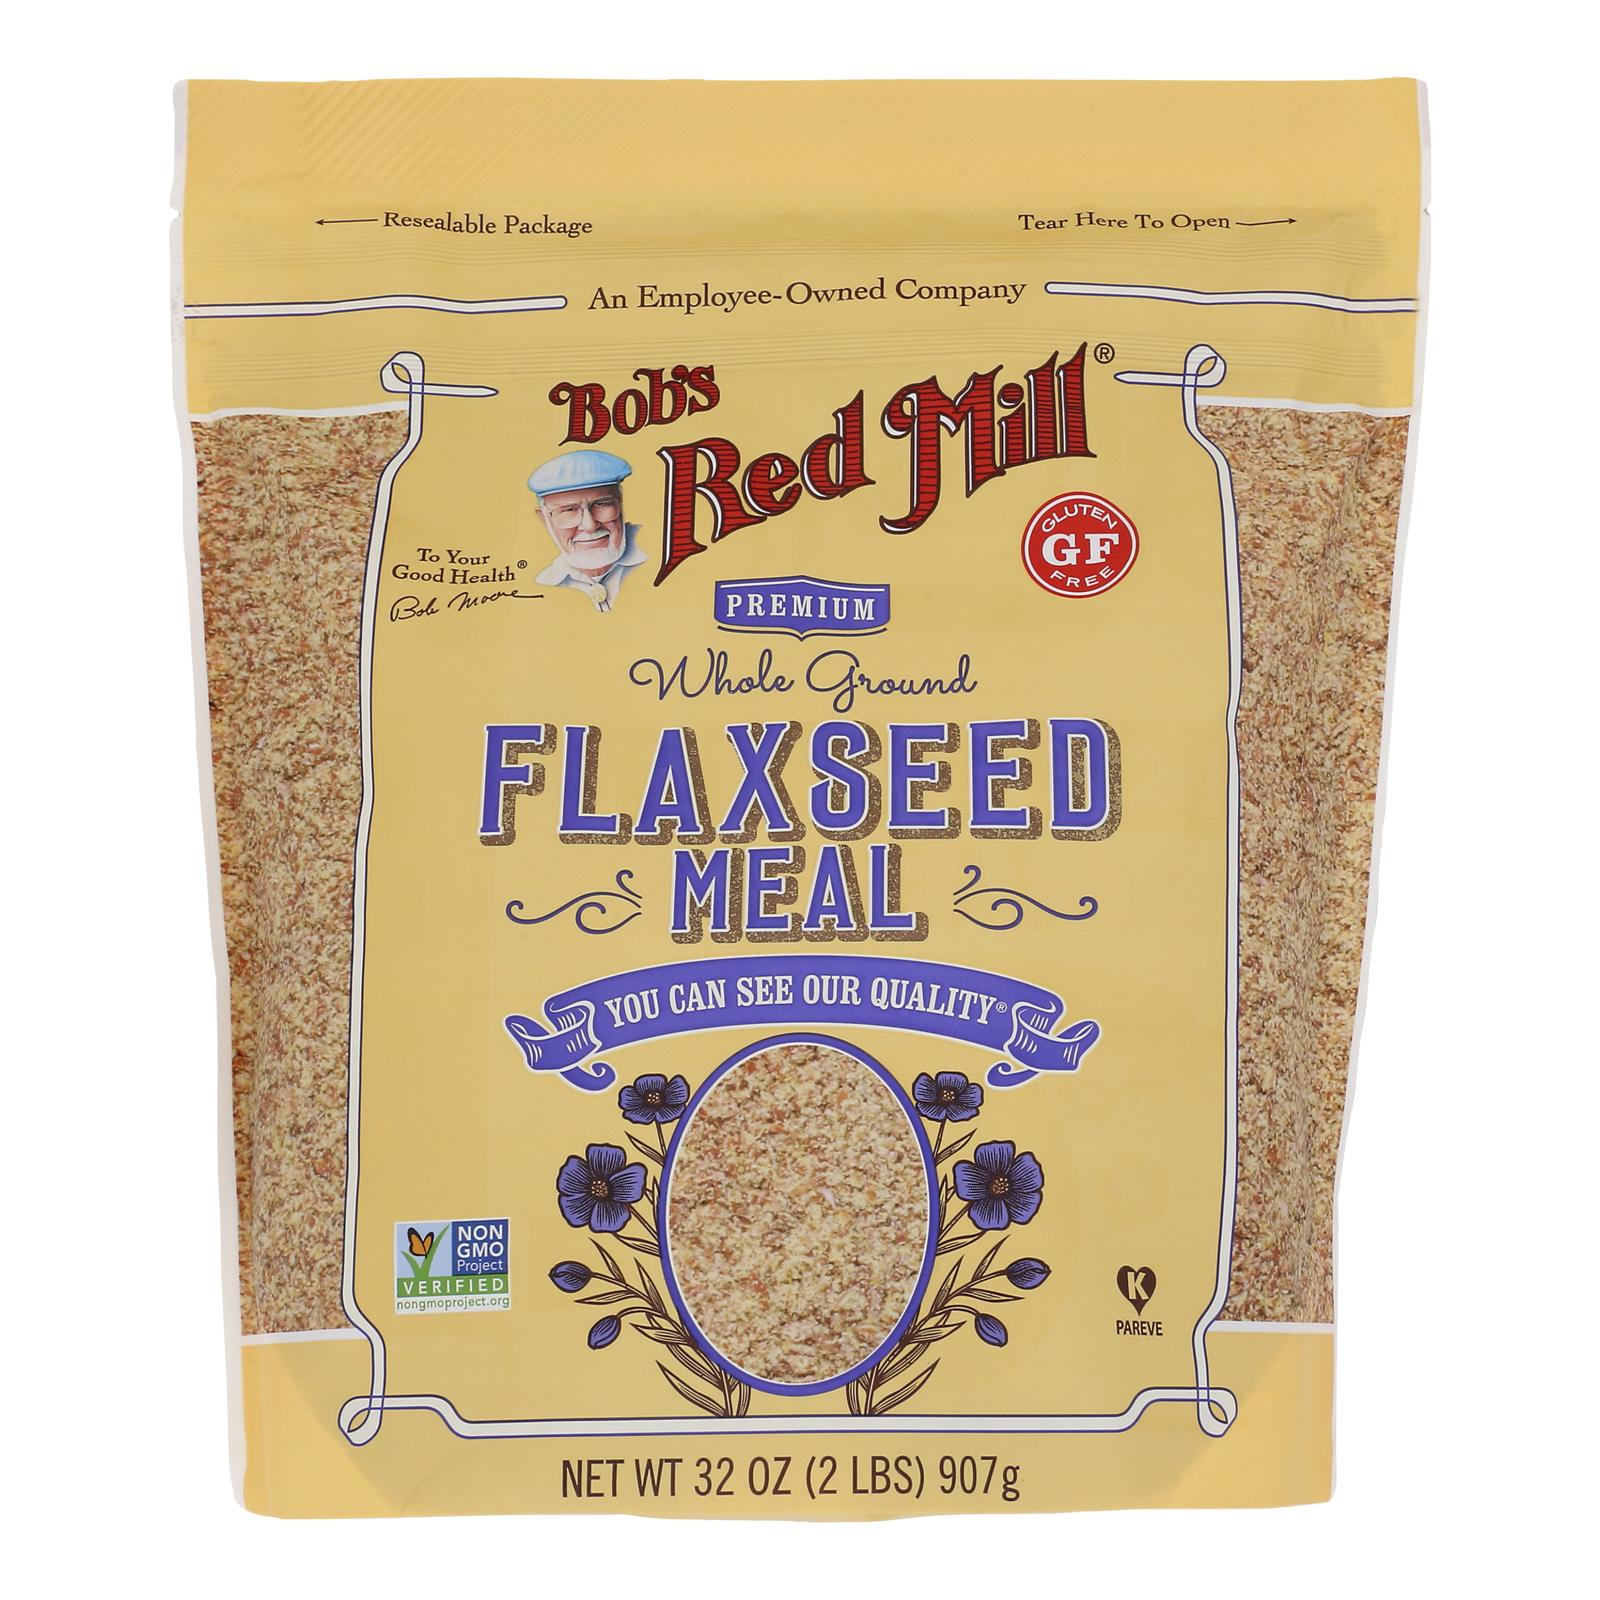 Bob's Red Mill - Flaxseed Meal - Gluten Free - Case Of 4 - 32 Oz